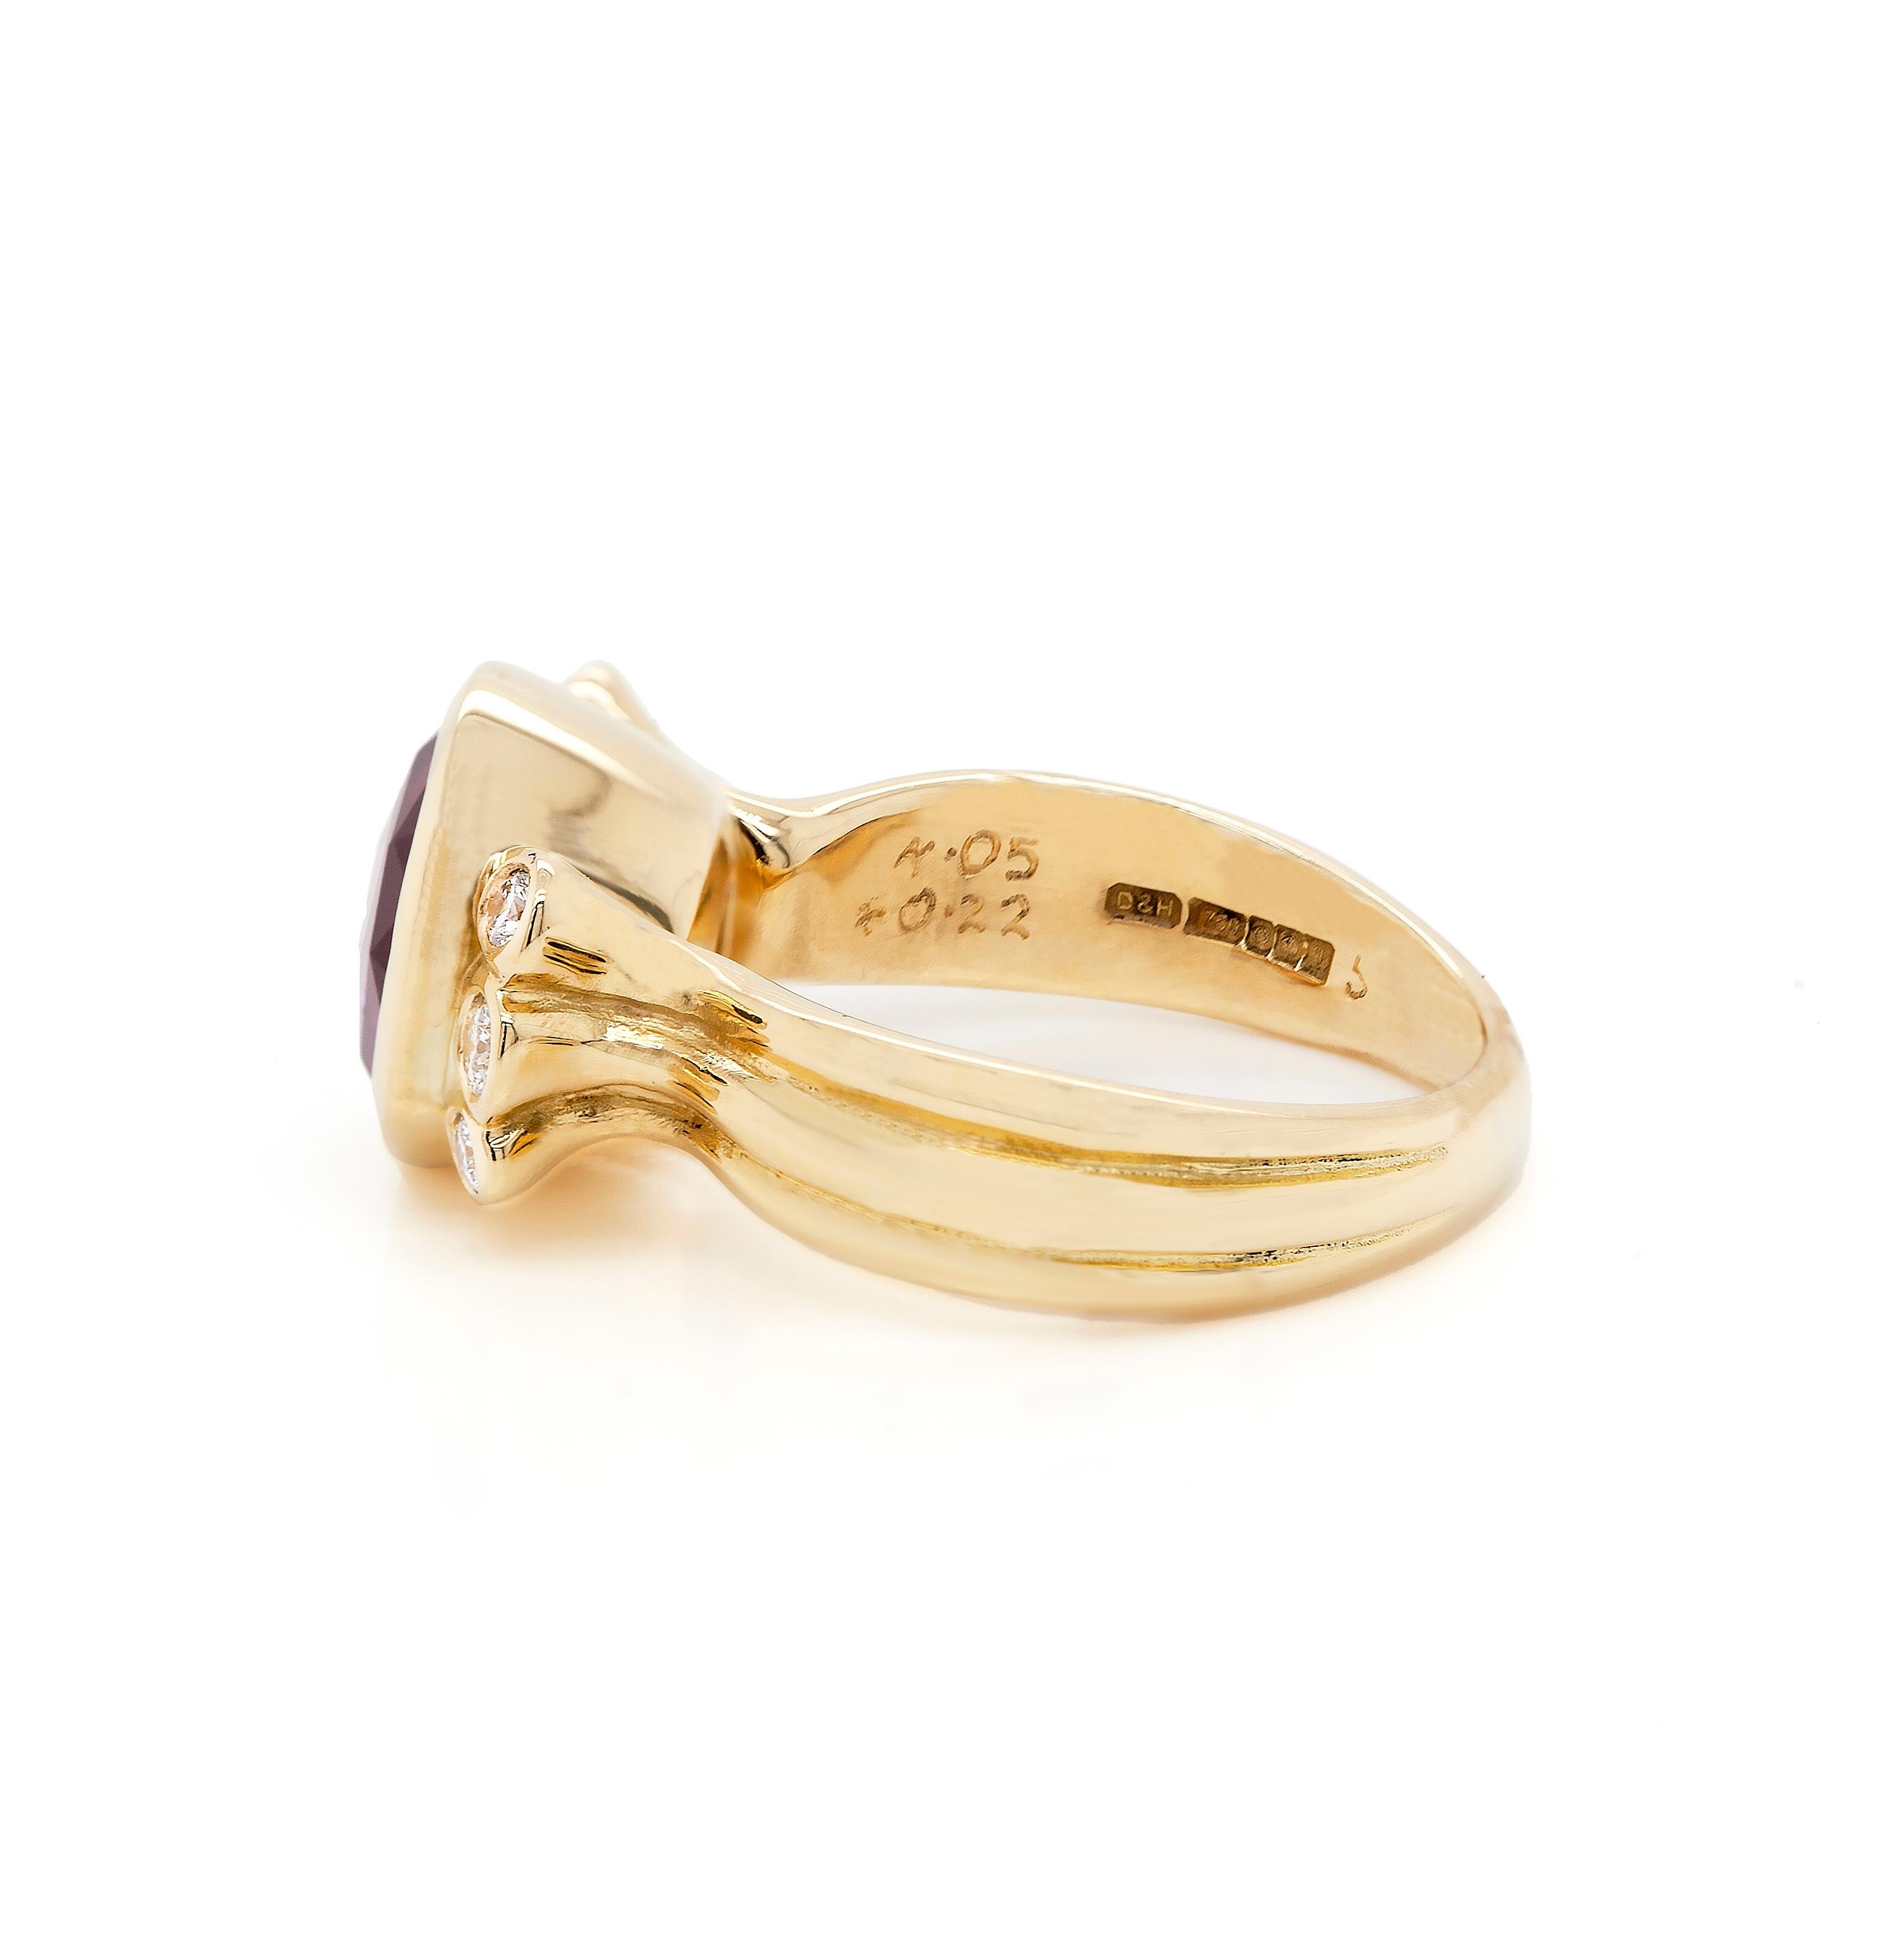 Add a touch of colour to your jewellery collection with this bold and fascinating cocktail ring by Dower and Hall, expertly crafted from 18 carat yellow gold.

The charming ring features a vibrant and eye clean pink tourmaline, boasting an